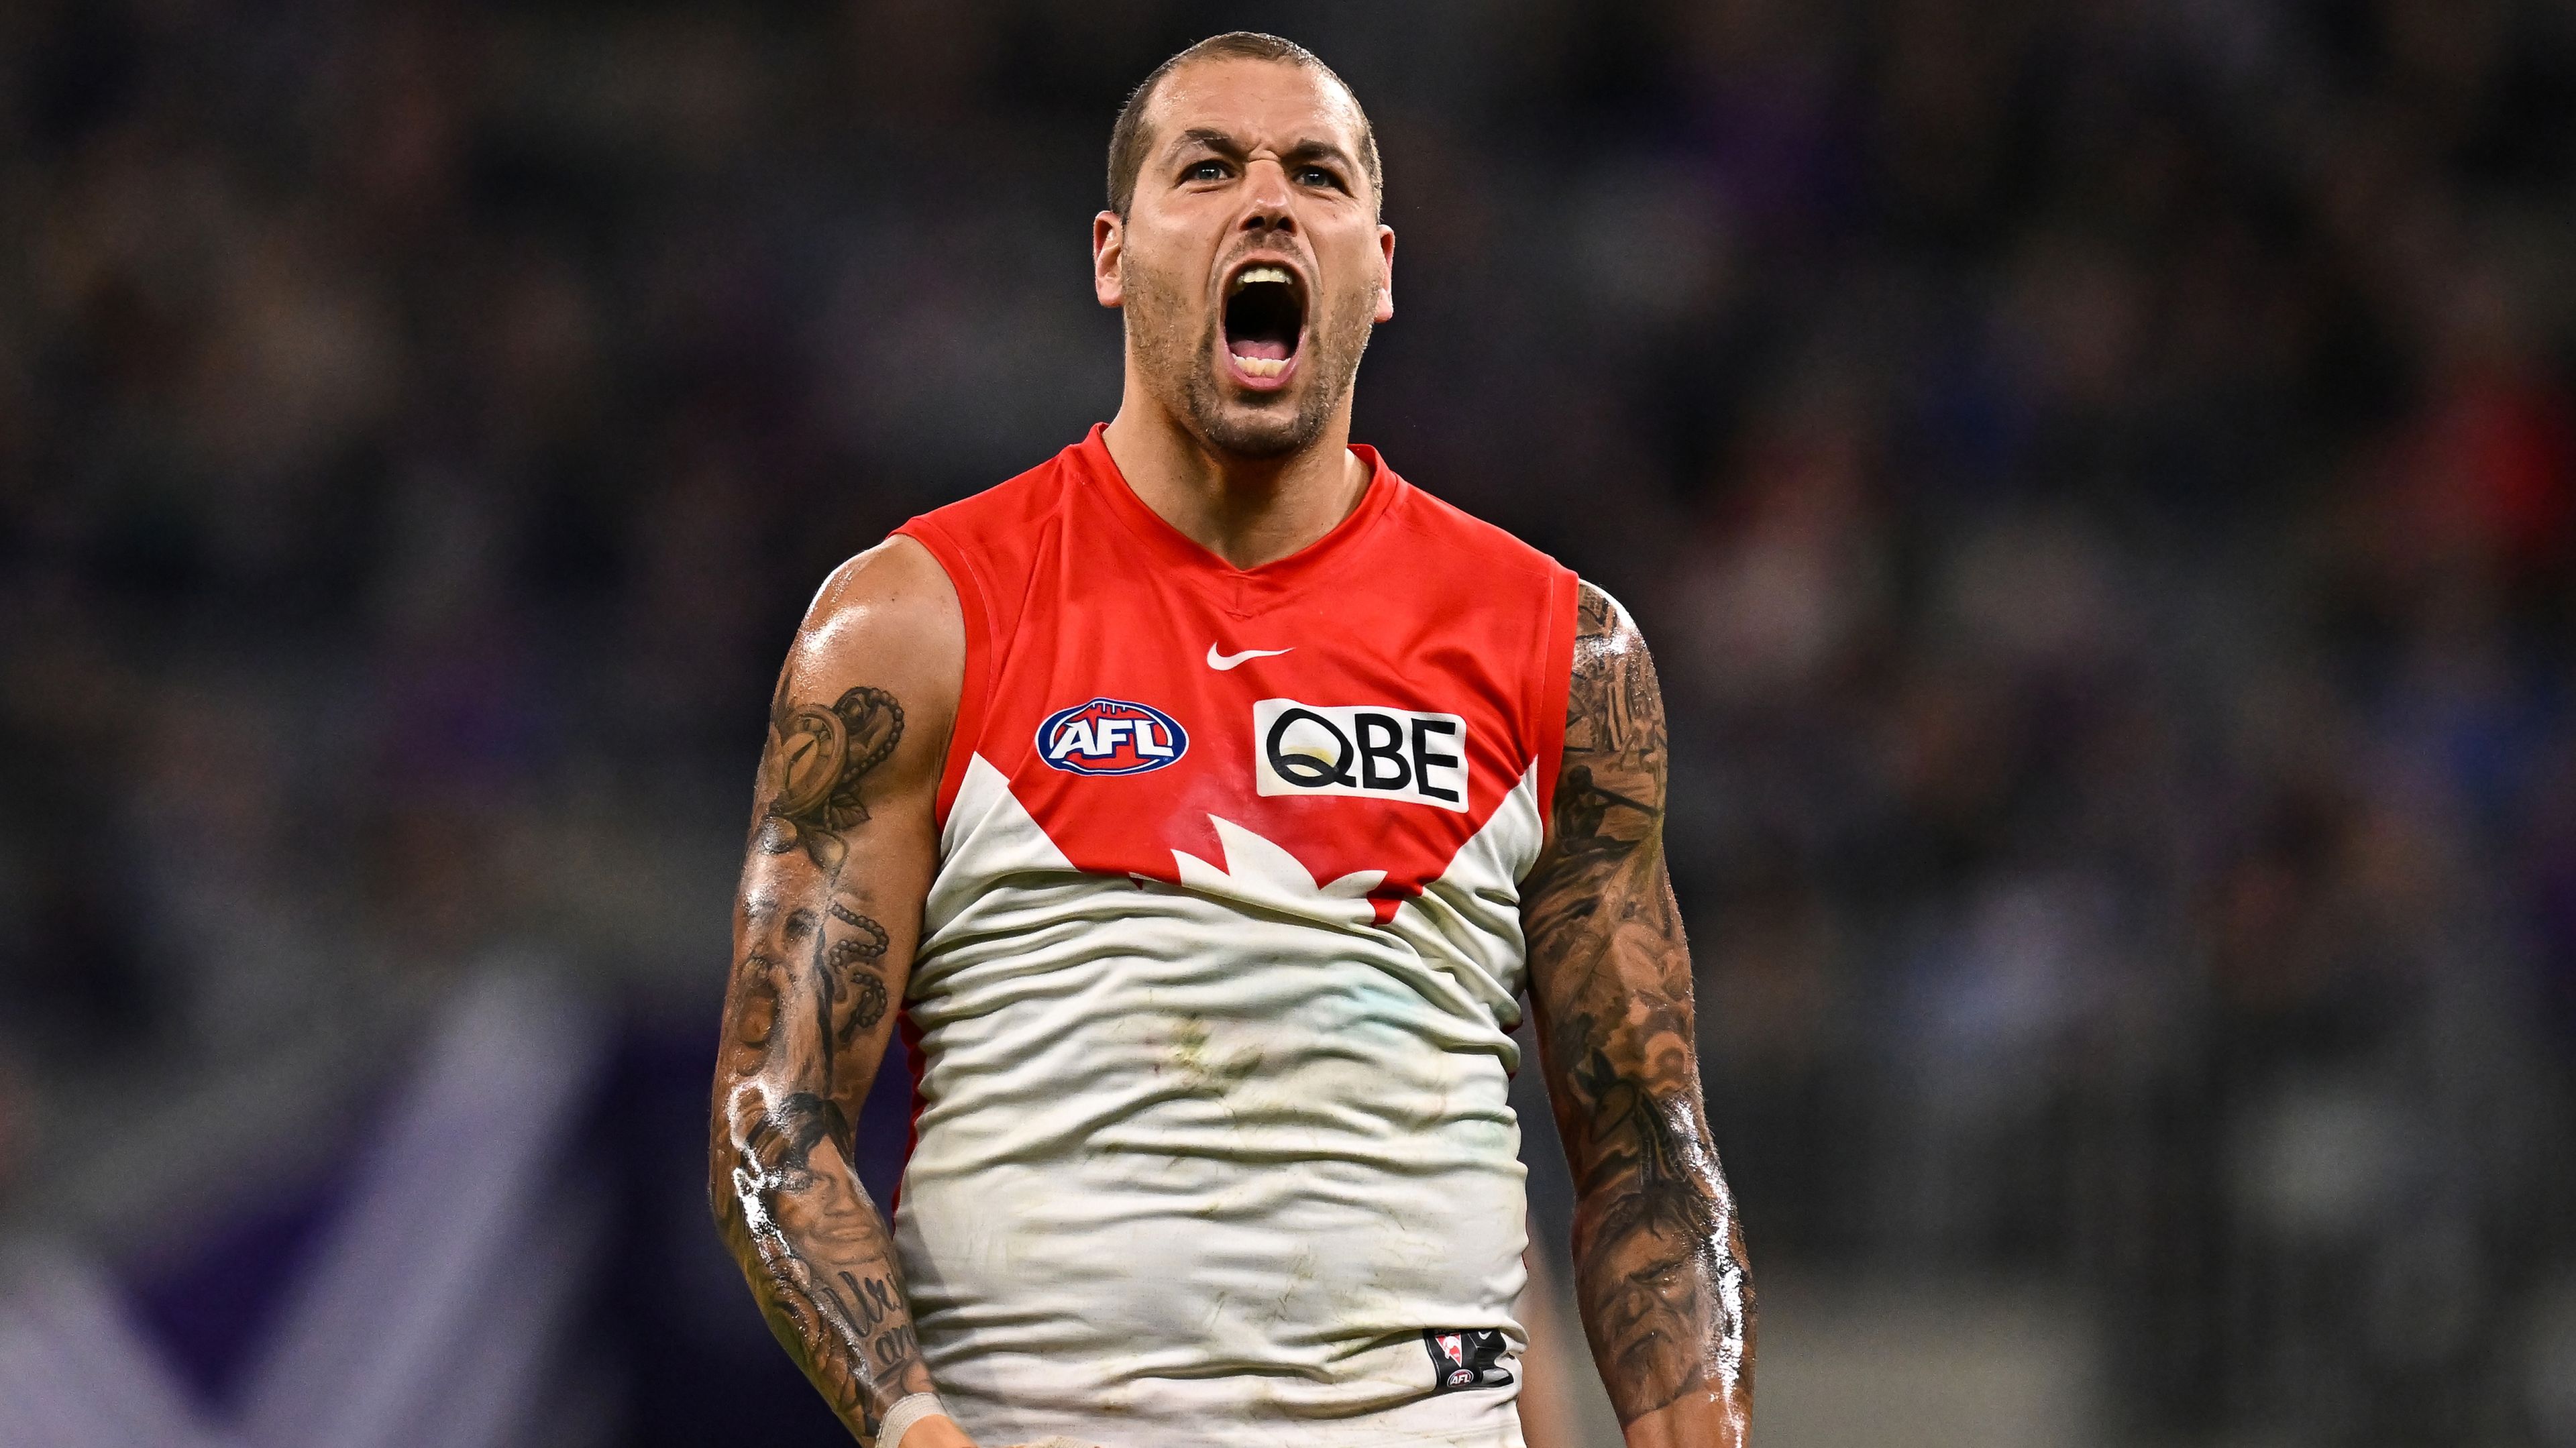 PERTH, AUSTRALIA - JULY 22: Lance Franklin of the Swans celebrates a goal during the 2023 AFL Round 19 match between the Fremantle Dockers and the Sydney Swans at Optus Stadium on July 22, 2023 in Perth, Australia. (Photo by Daniel Carson/AFL Photos via Getty Images)